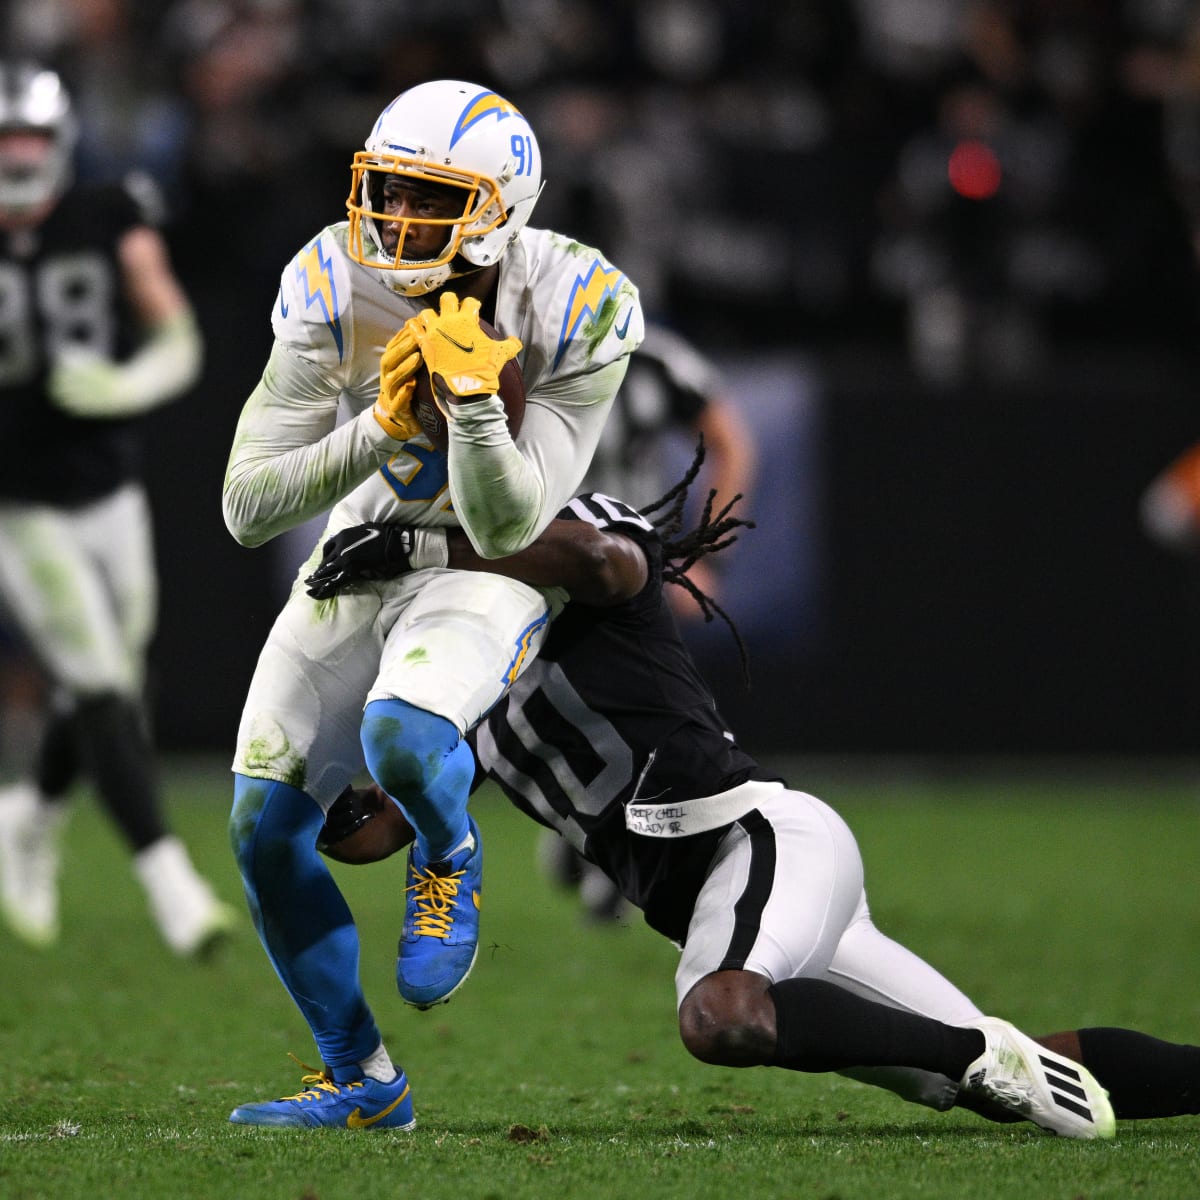 Raiders-Chargers odds: Opening odds, spread, moneyline, over/under